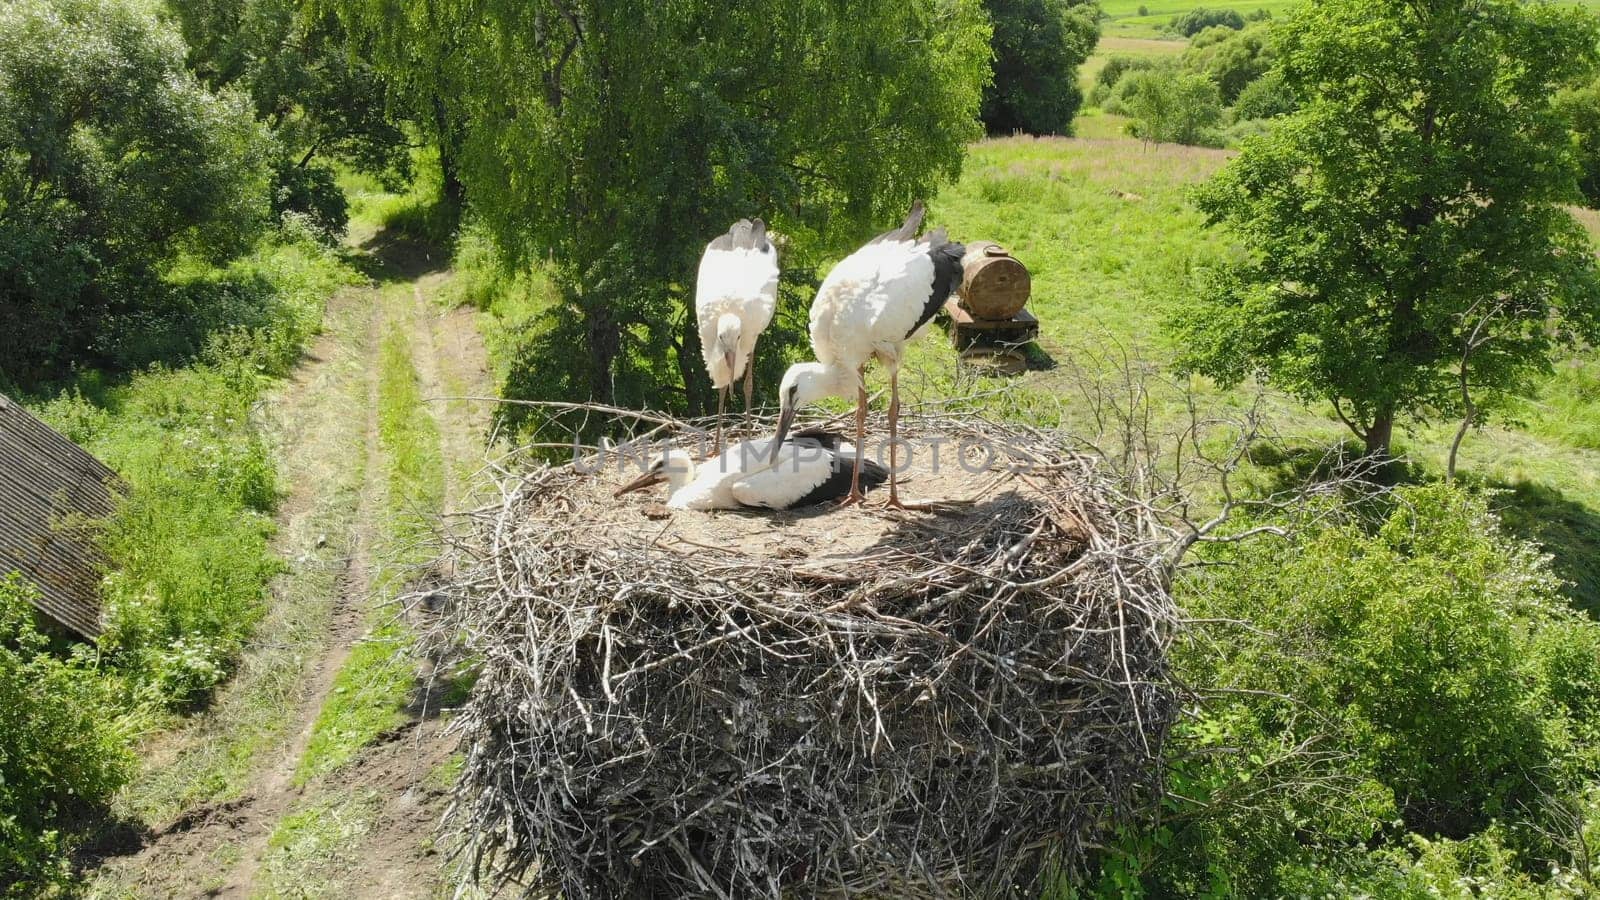 The stork's mother flies to the nest and feeds them. Drone view. by DovidPro